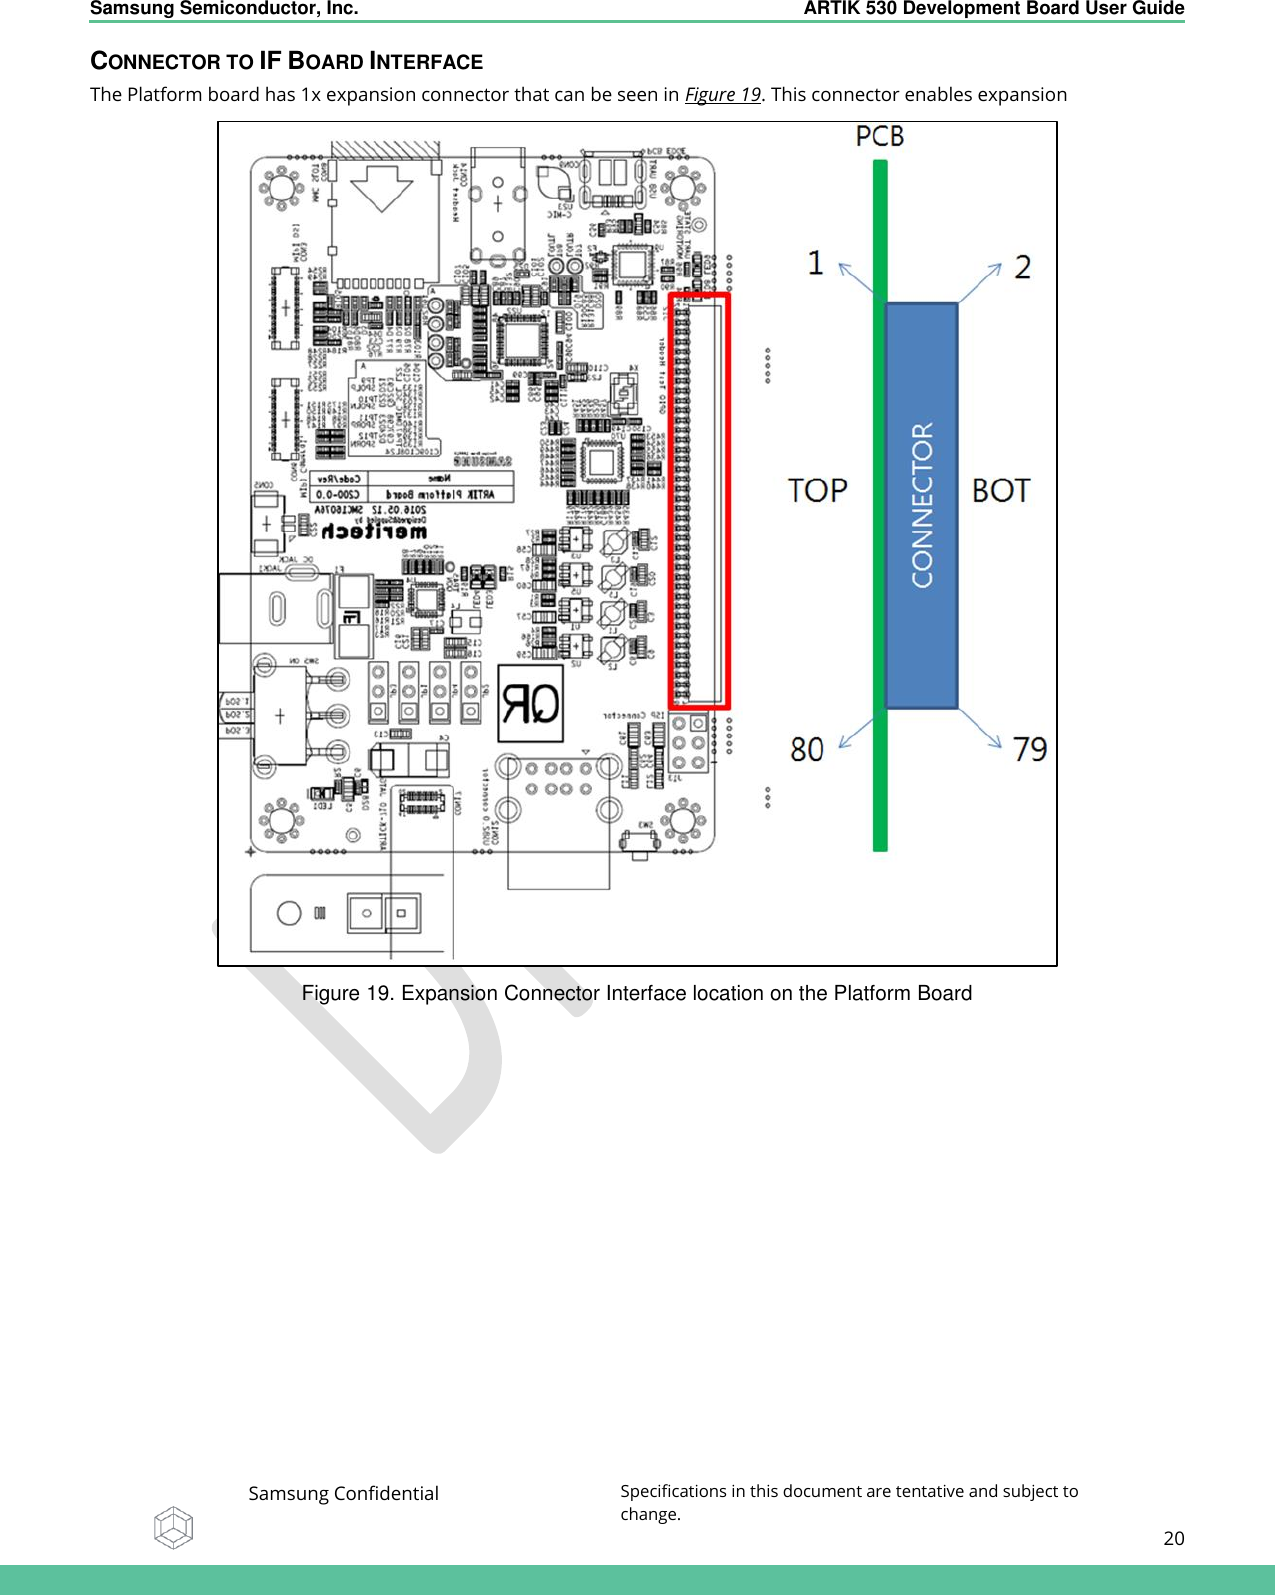    Samsung Semiconductor, Inc.  ARTIK 530 Development Board User Guide   Samsung Confidential Specifications in this document are tentative and subject to change.  20   CONNECTOR TO IF BOARD INTERFACE The Platform board has 1x expansion connector that can be seen in Figure 19. This connector enables expansion  Figure 19. Expansion Connector Interface location on the Platform Board  